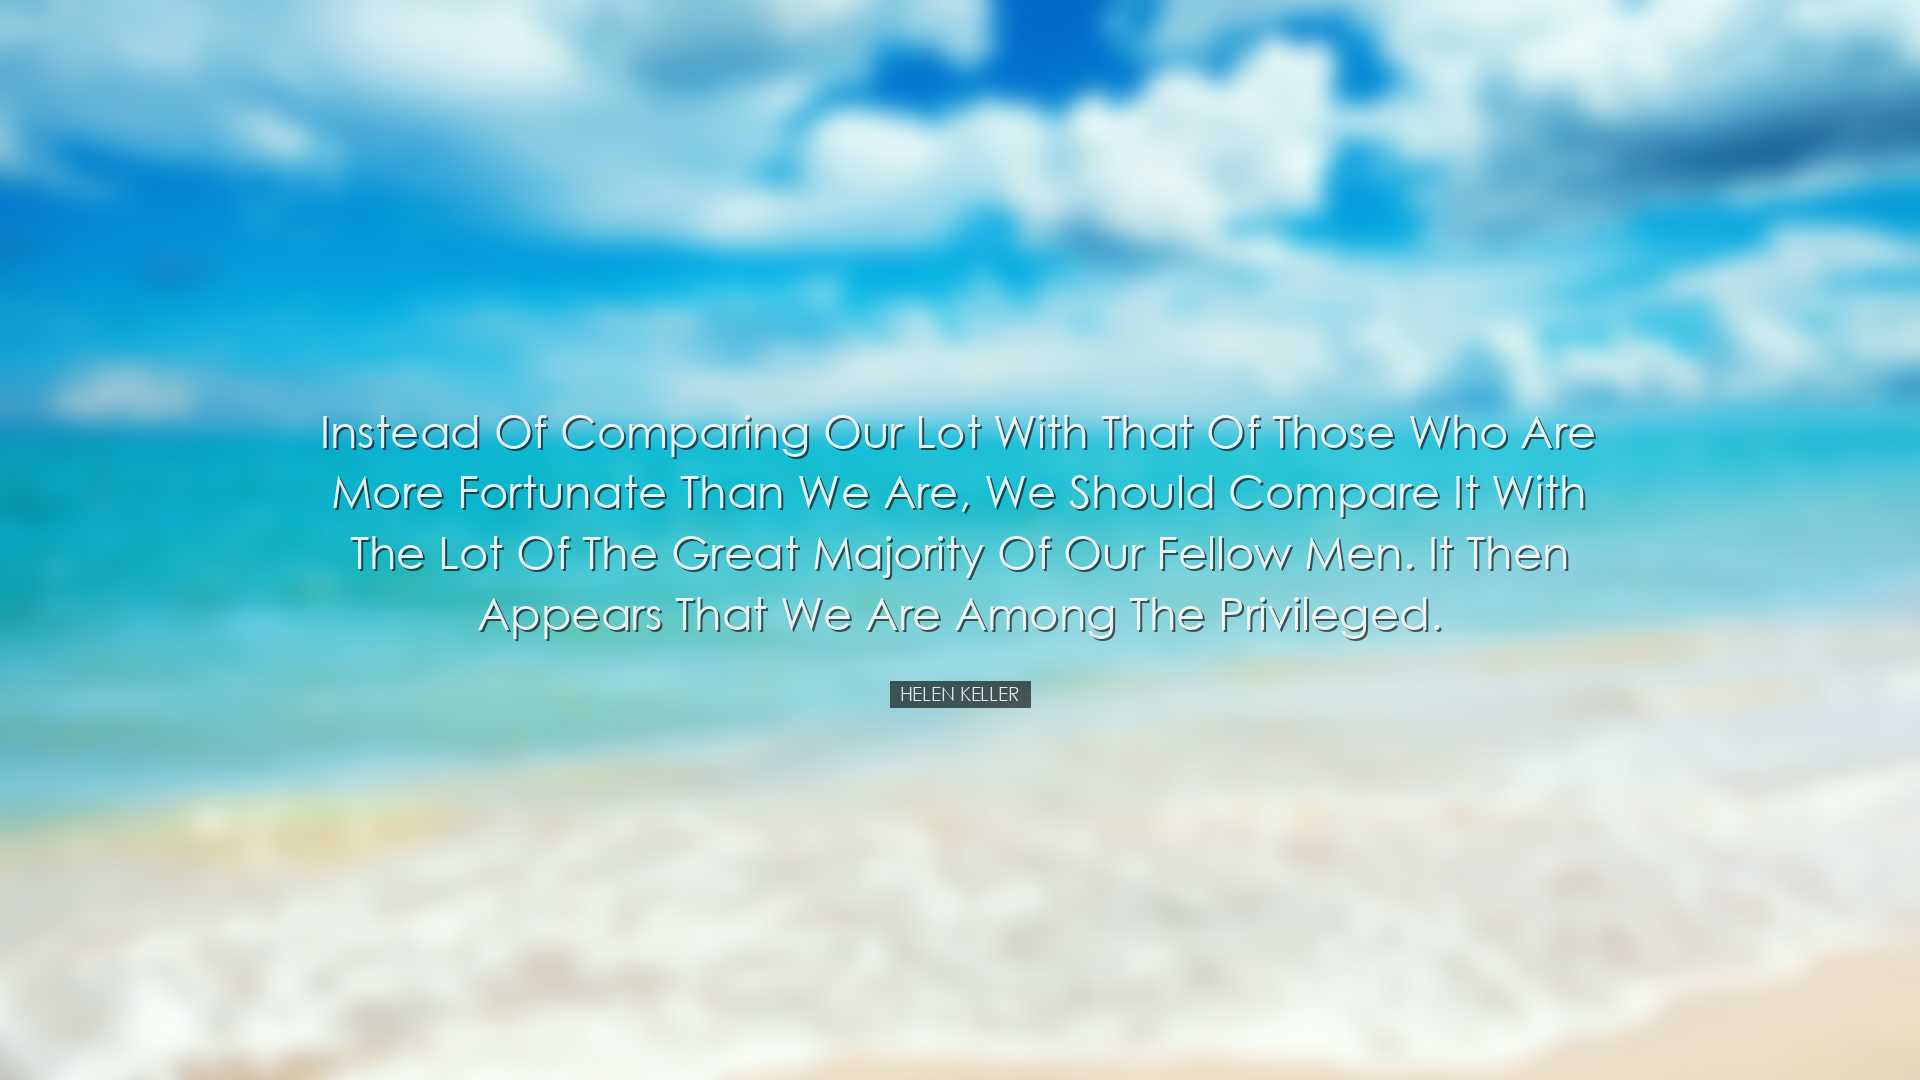 Instead of comparing our lot with that of those who are more fortu